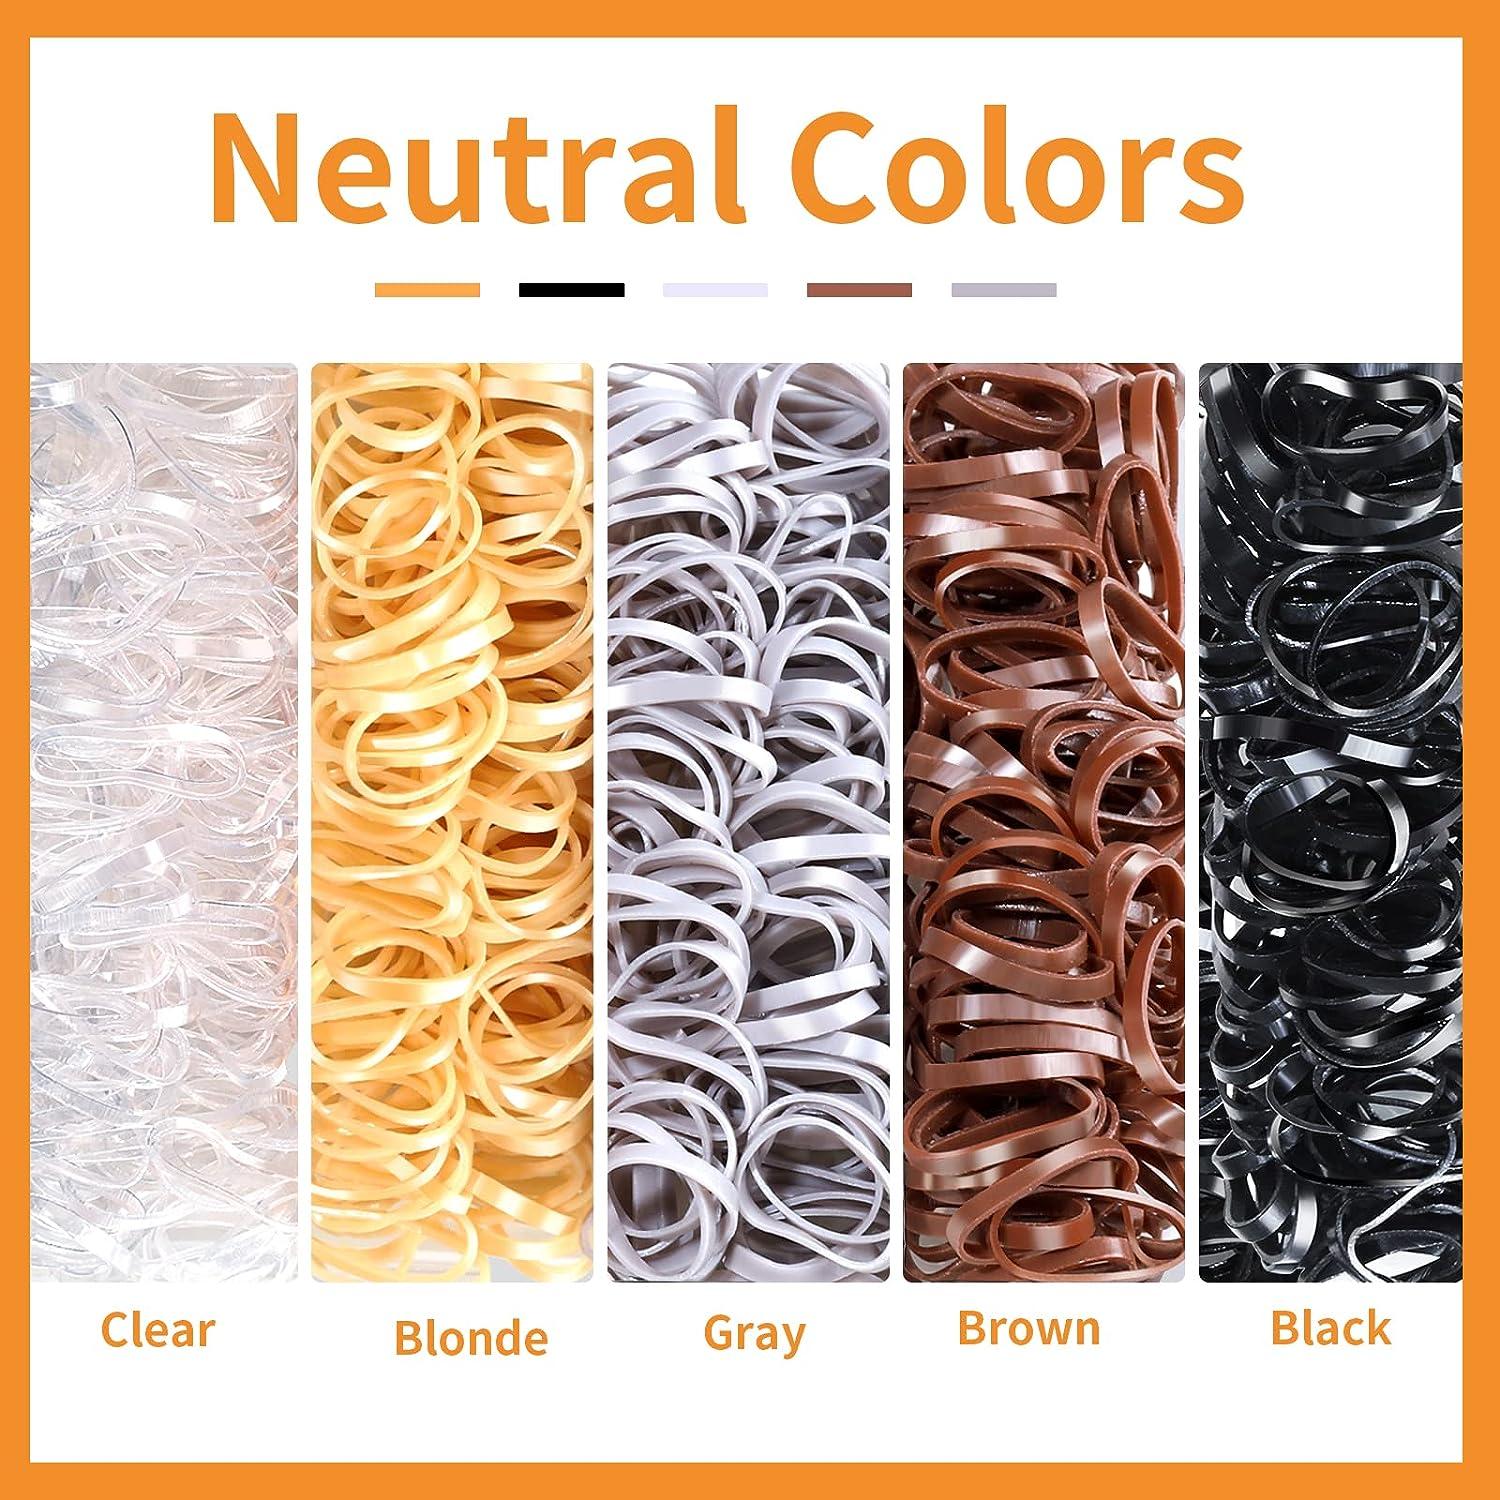 YGDZ Elastic Hair Bands 24 Colors, 1500 Pcs Mini Hair Rubber Bands for Hair, Small Hair Ties, Ponytail Holders, Colorful Hair Accessories for